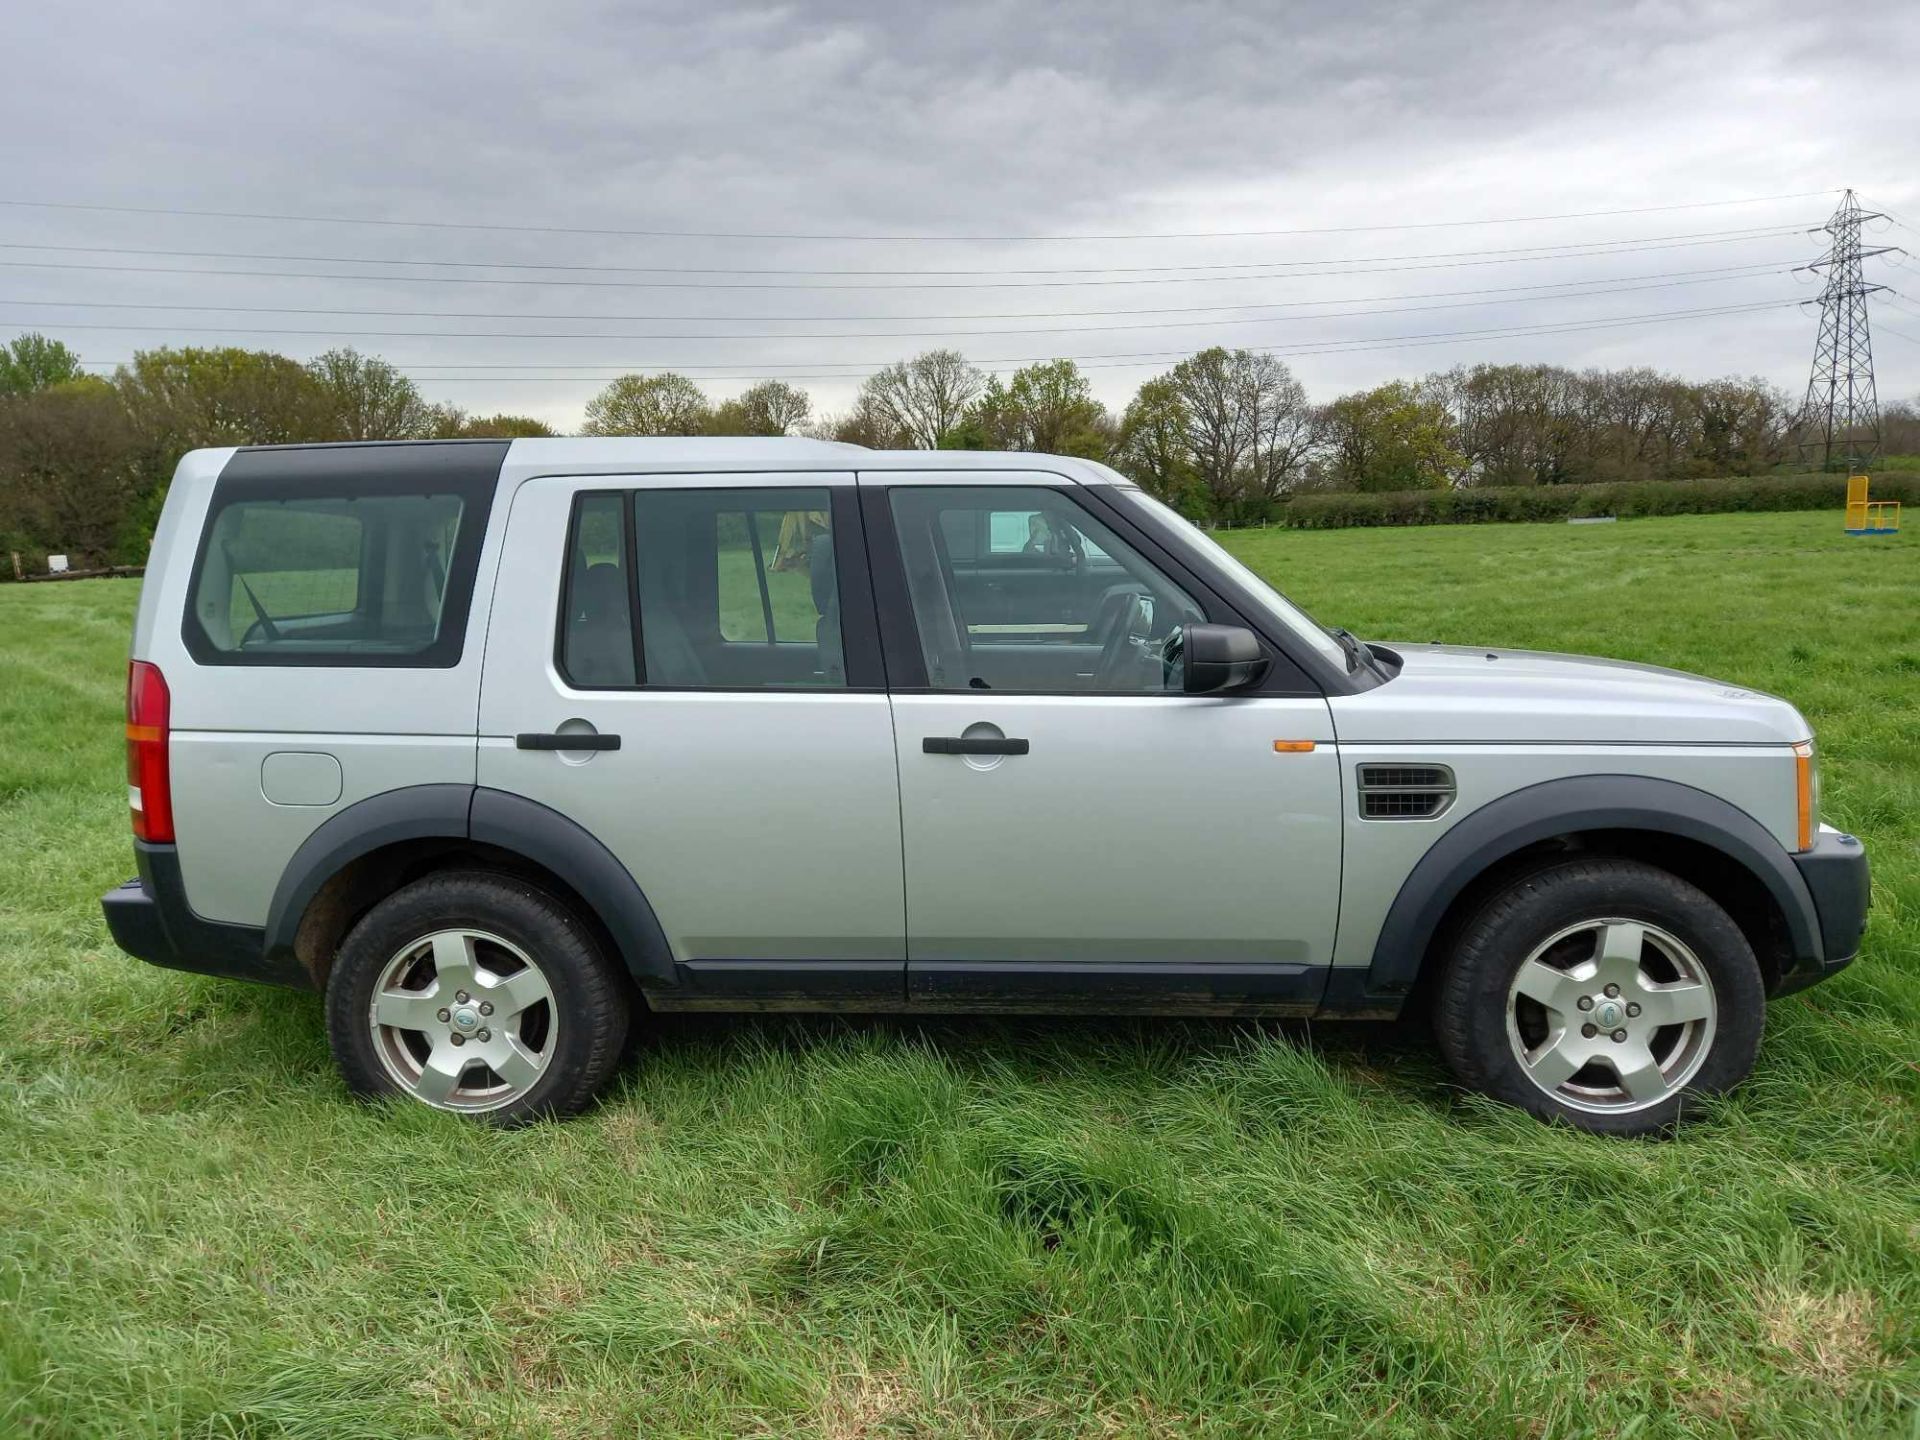 2006 Land Rover Discovery 3 TDV6S, 4wd, silver, manual, diesel. Reg: KD06 GYH. Miles: 119,637. NB: r - Image 4 of 5